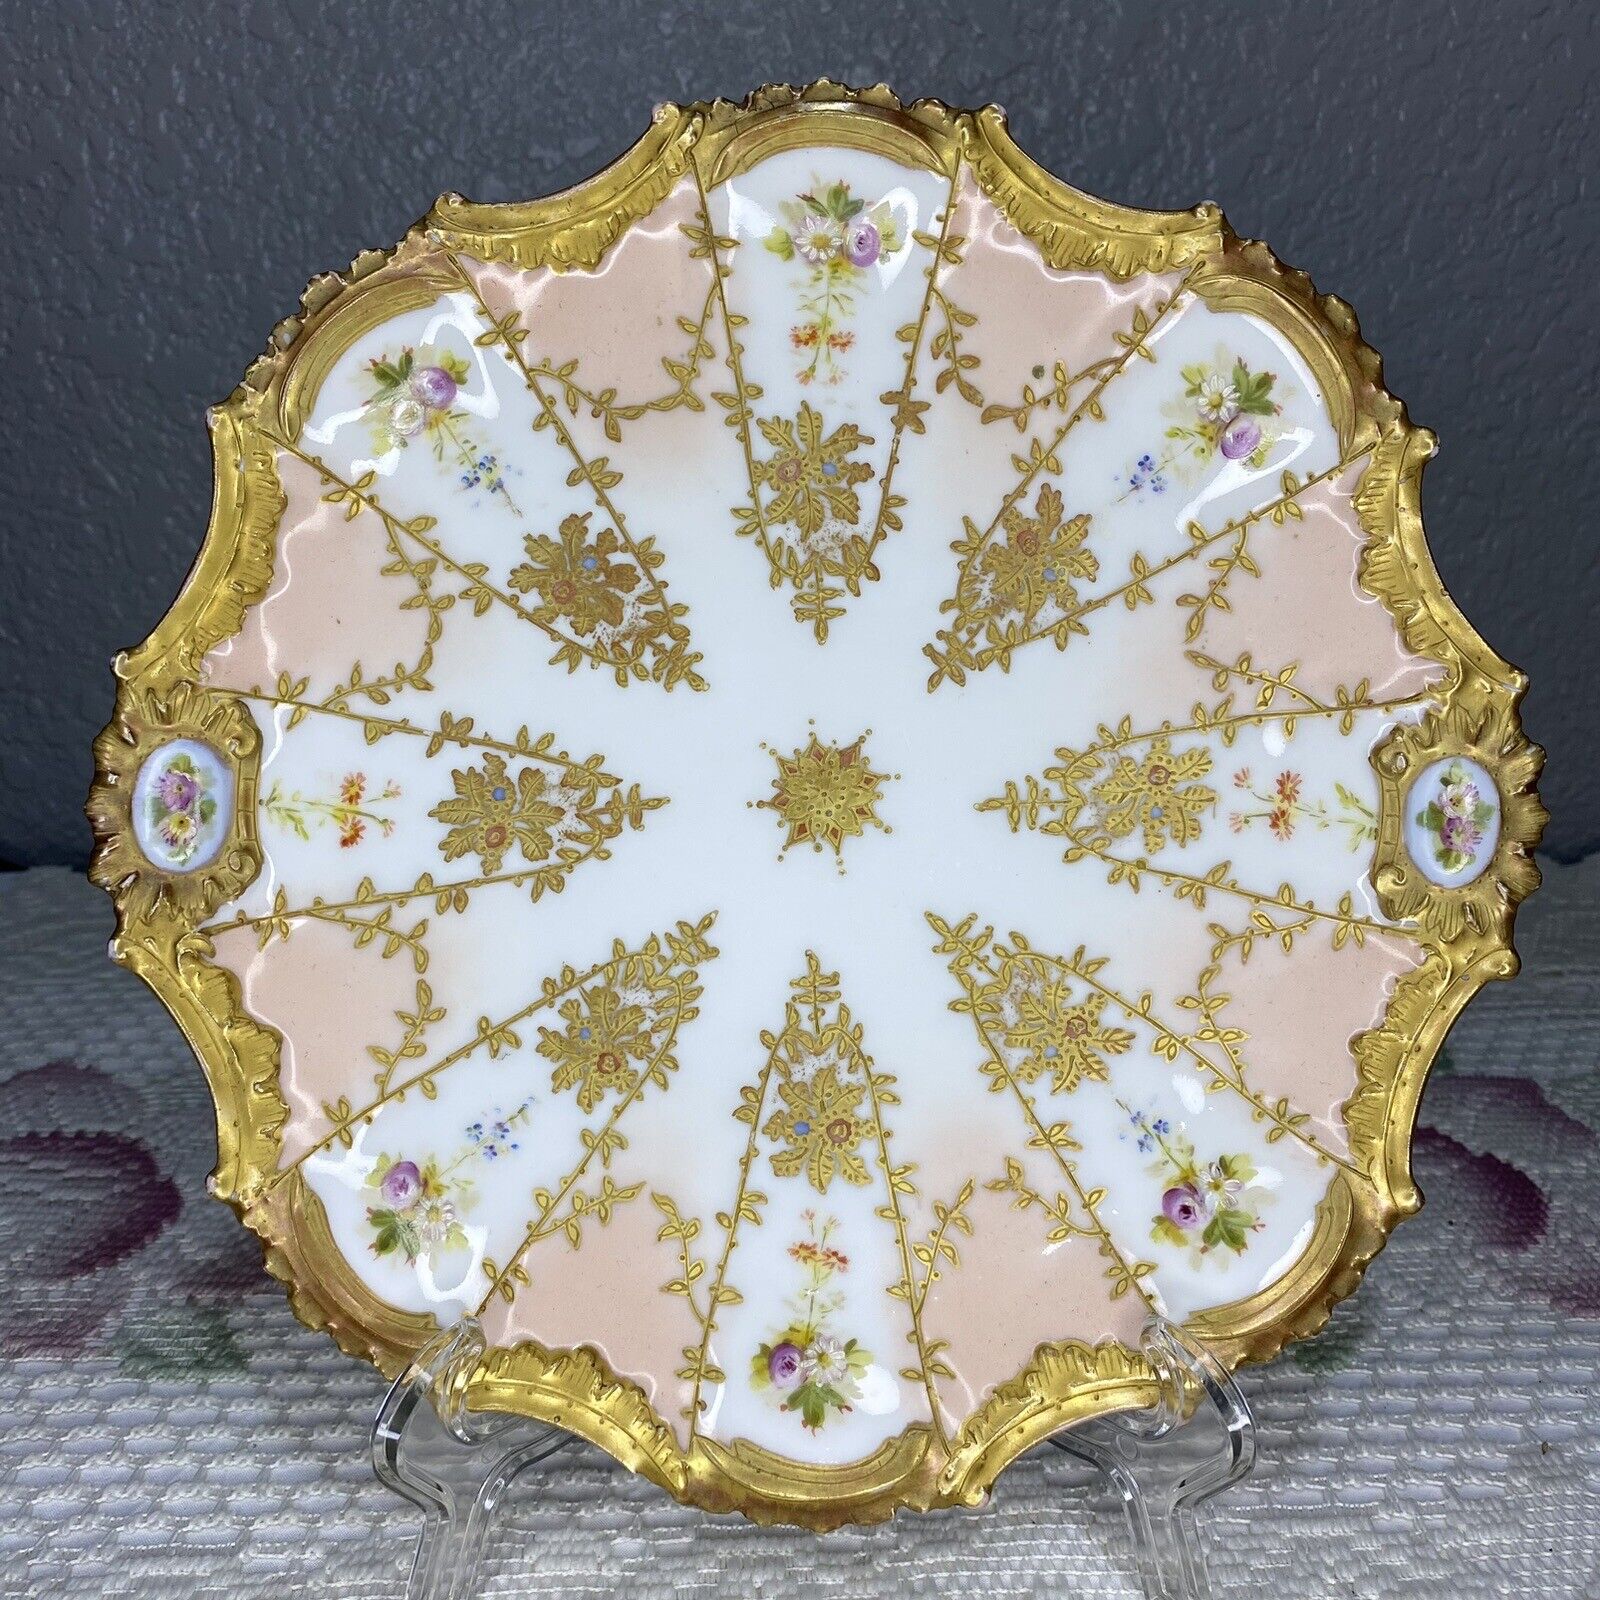 Vintage Heavily Gilded Gold Scalloped Victorian Style Decorative Plate